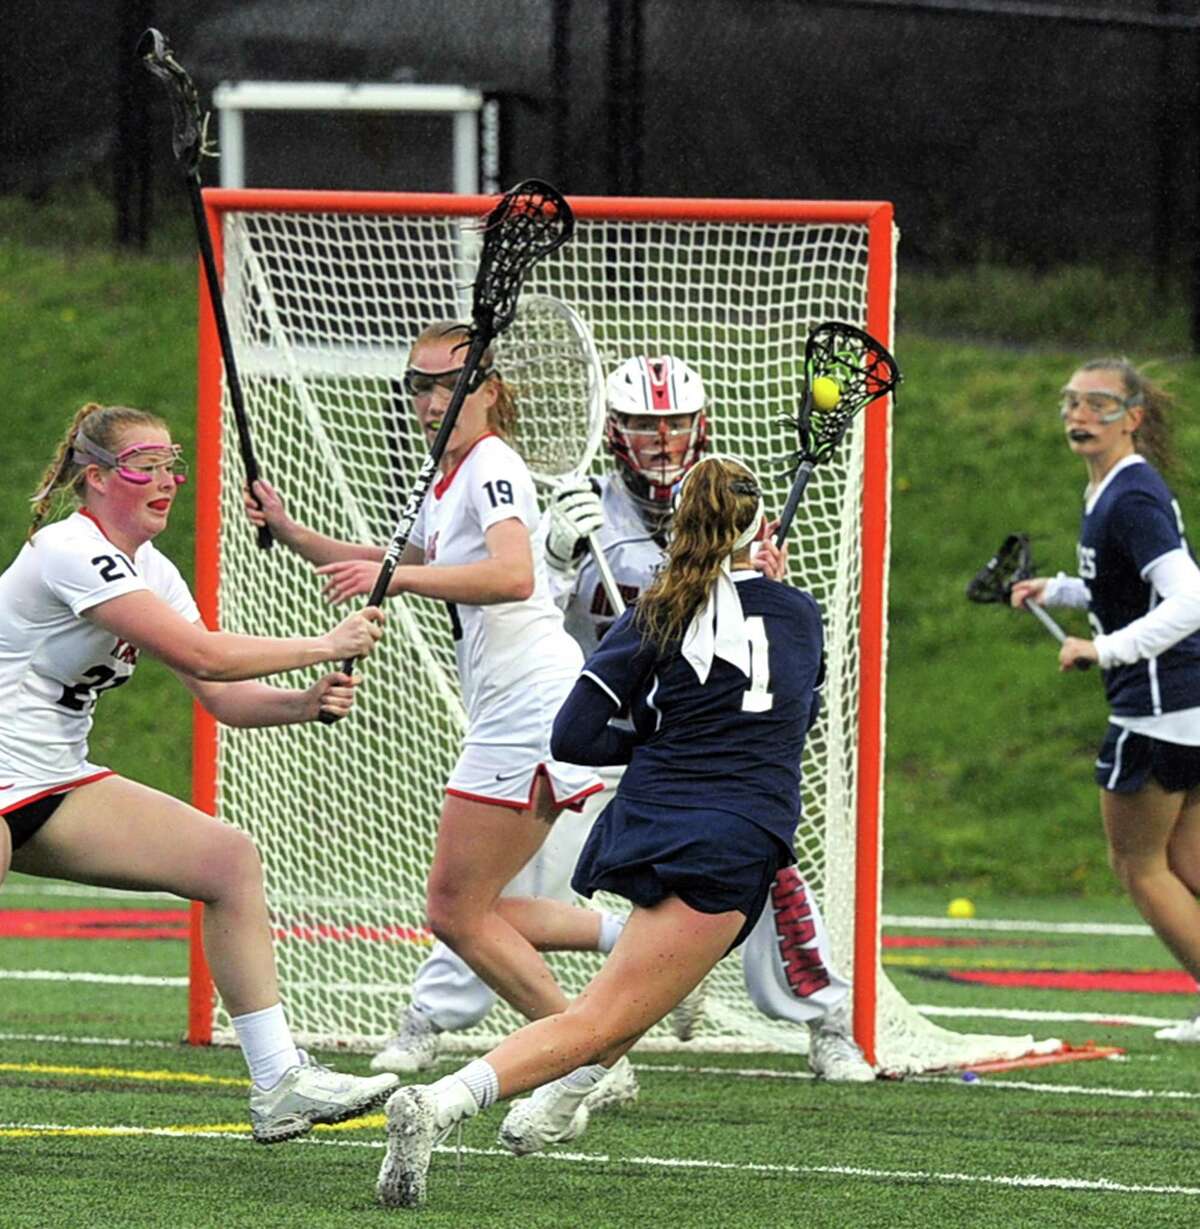 Staples Ellen Fair fires a shot on New Canaan goalie Caroline O'Dea in a varsity girls lacrosse game at New Canaan High School Dunning Field on Tuesday, April 25, 2017. New Canaan defeated Staples 16-8.